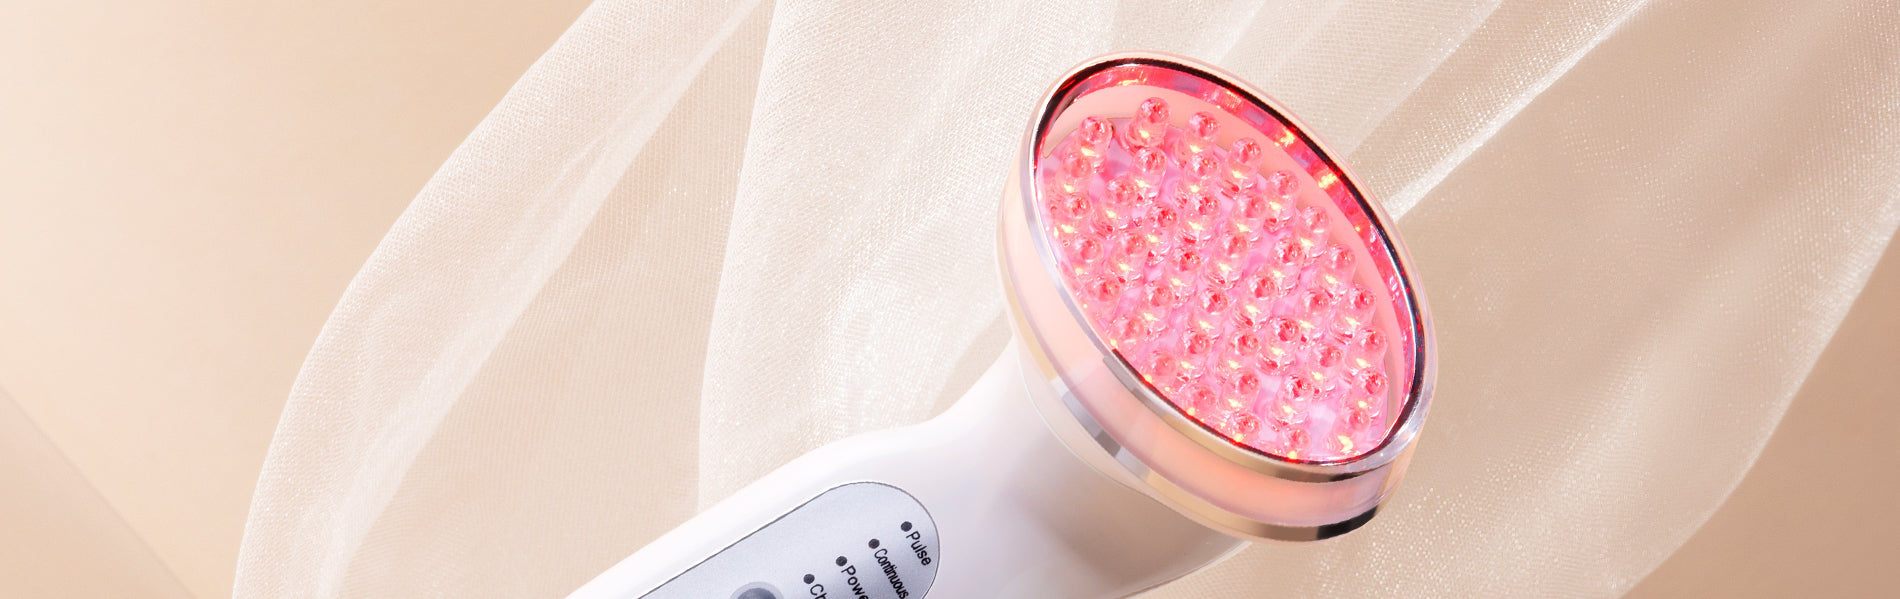 The Best Handheld Devices for LED Light Therapy